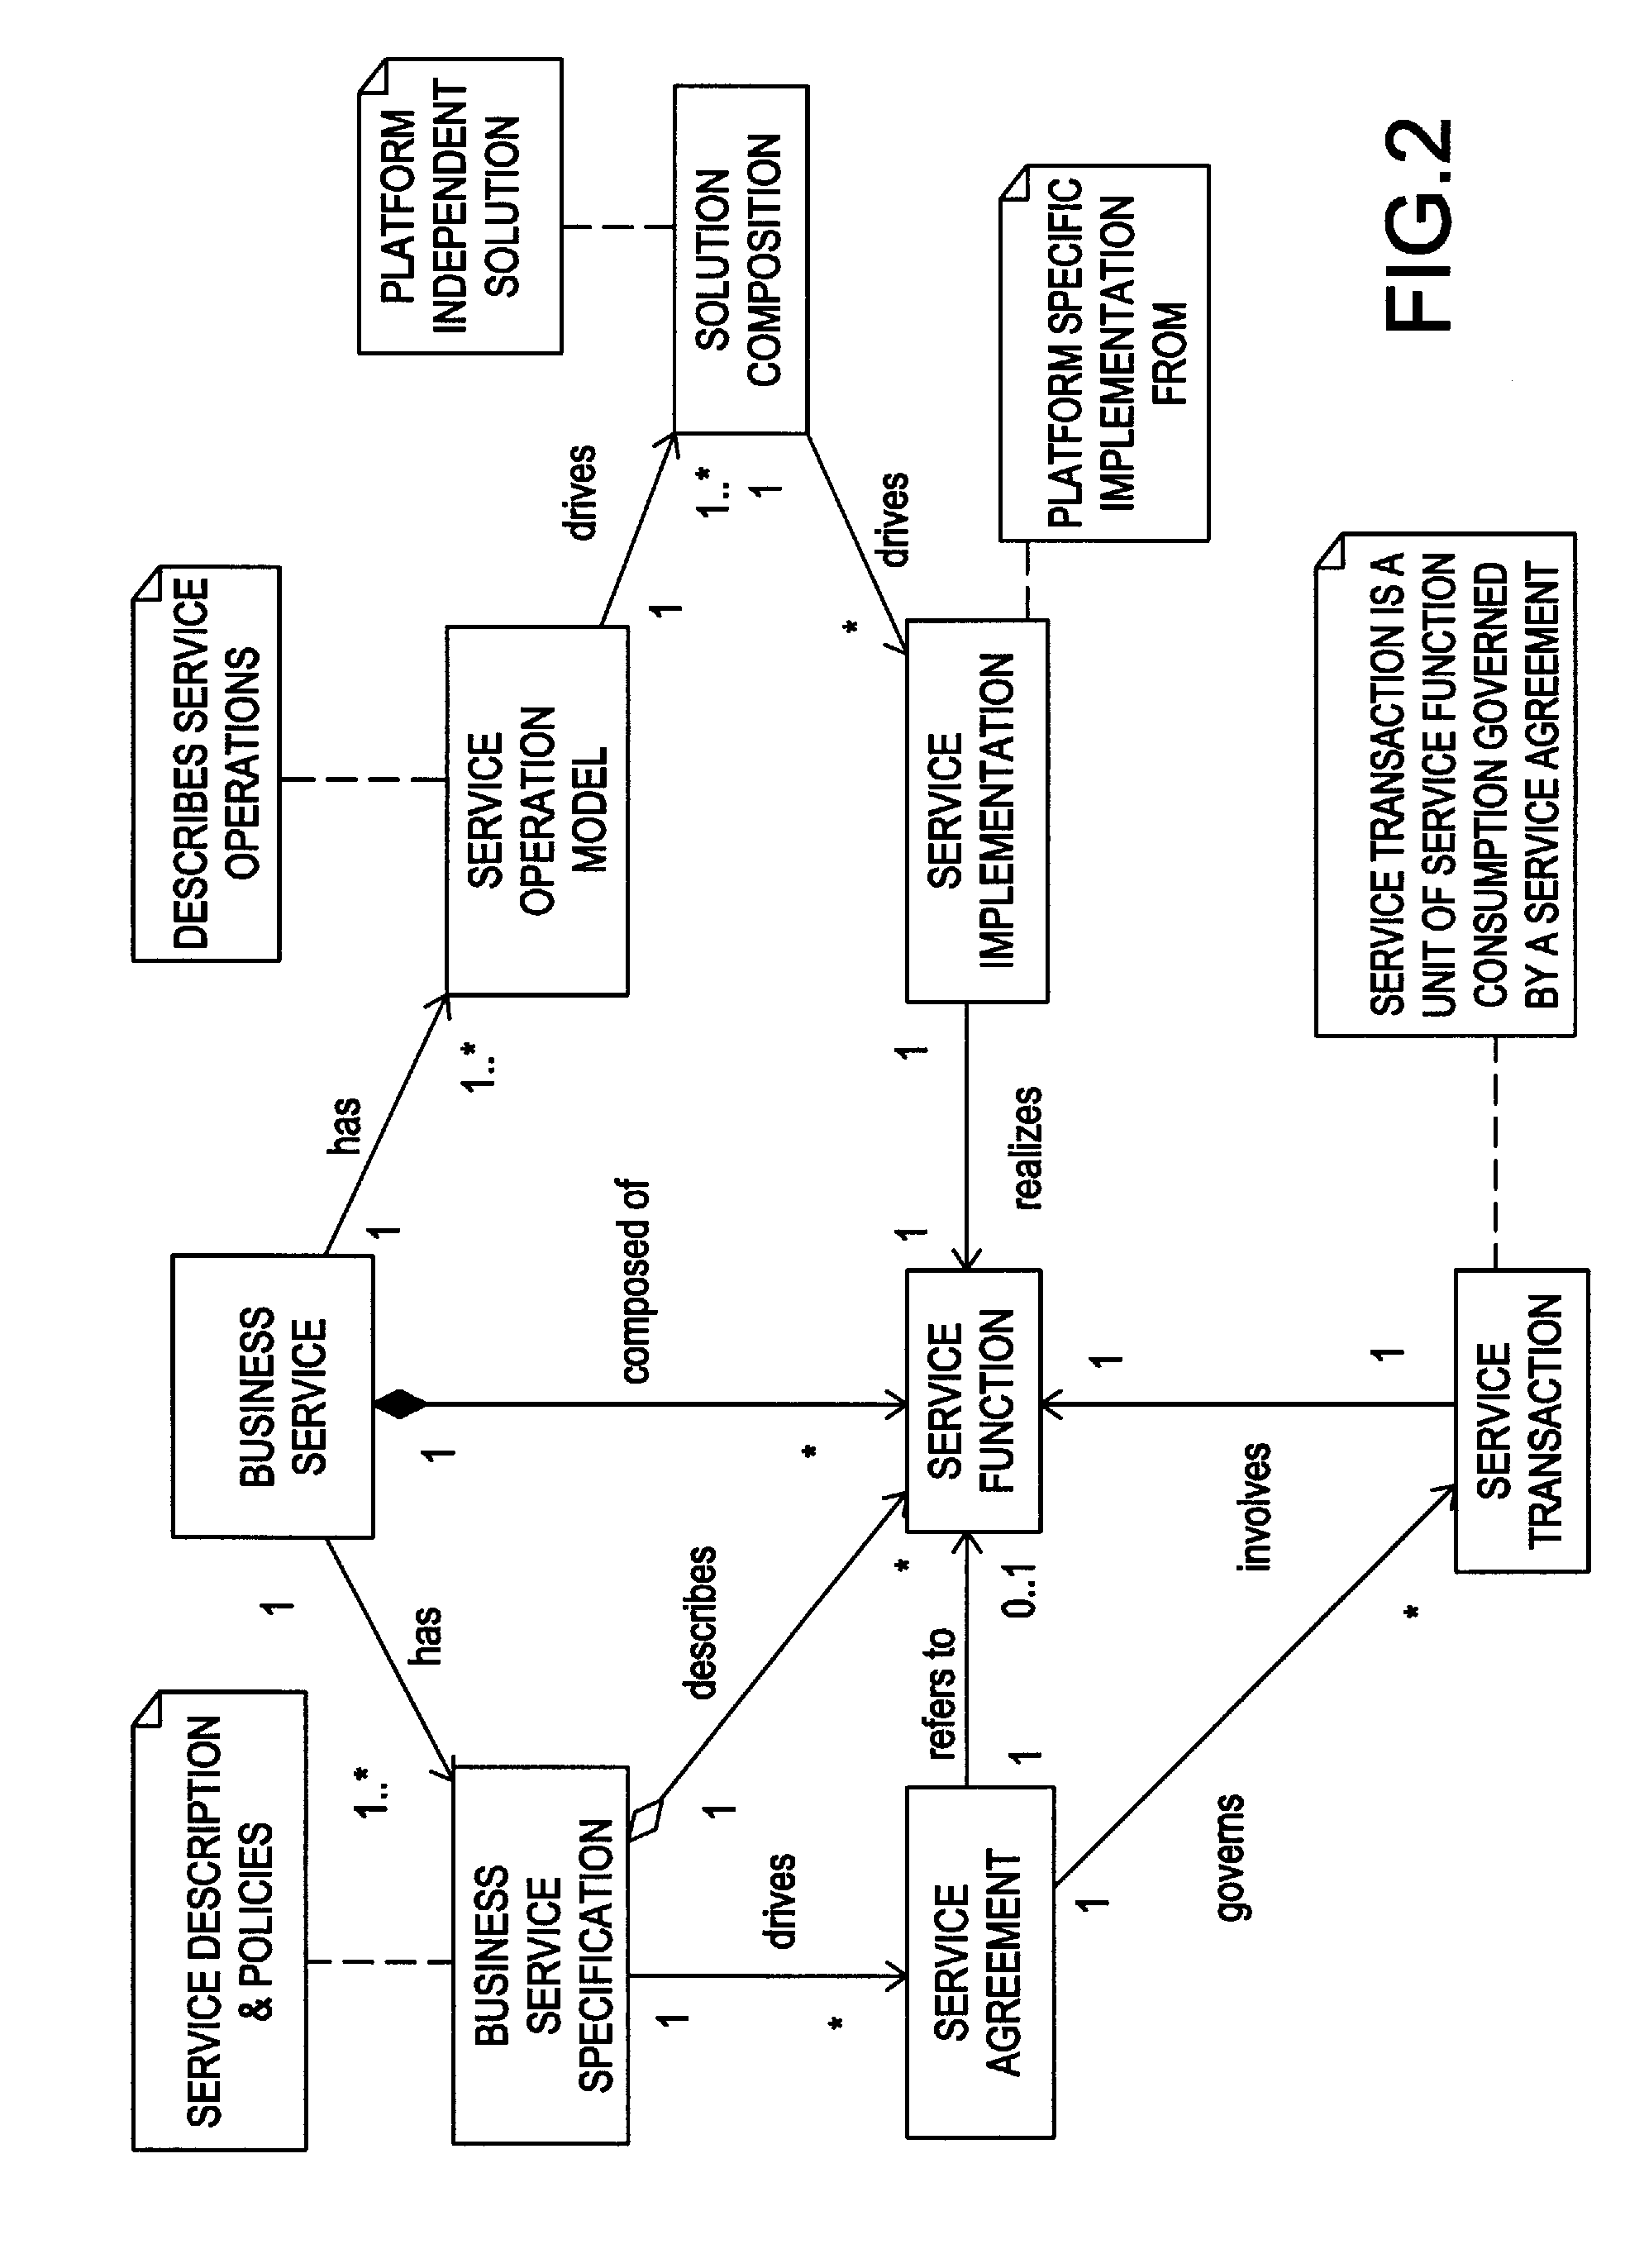 Method and system for modeling services in a service-oriented business